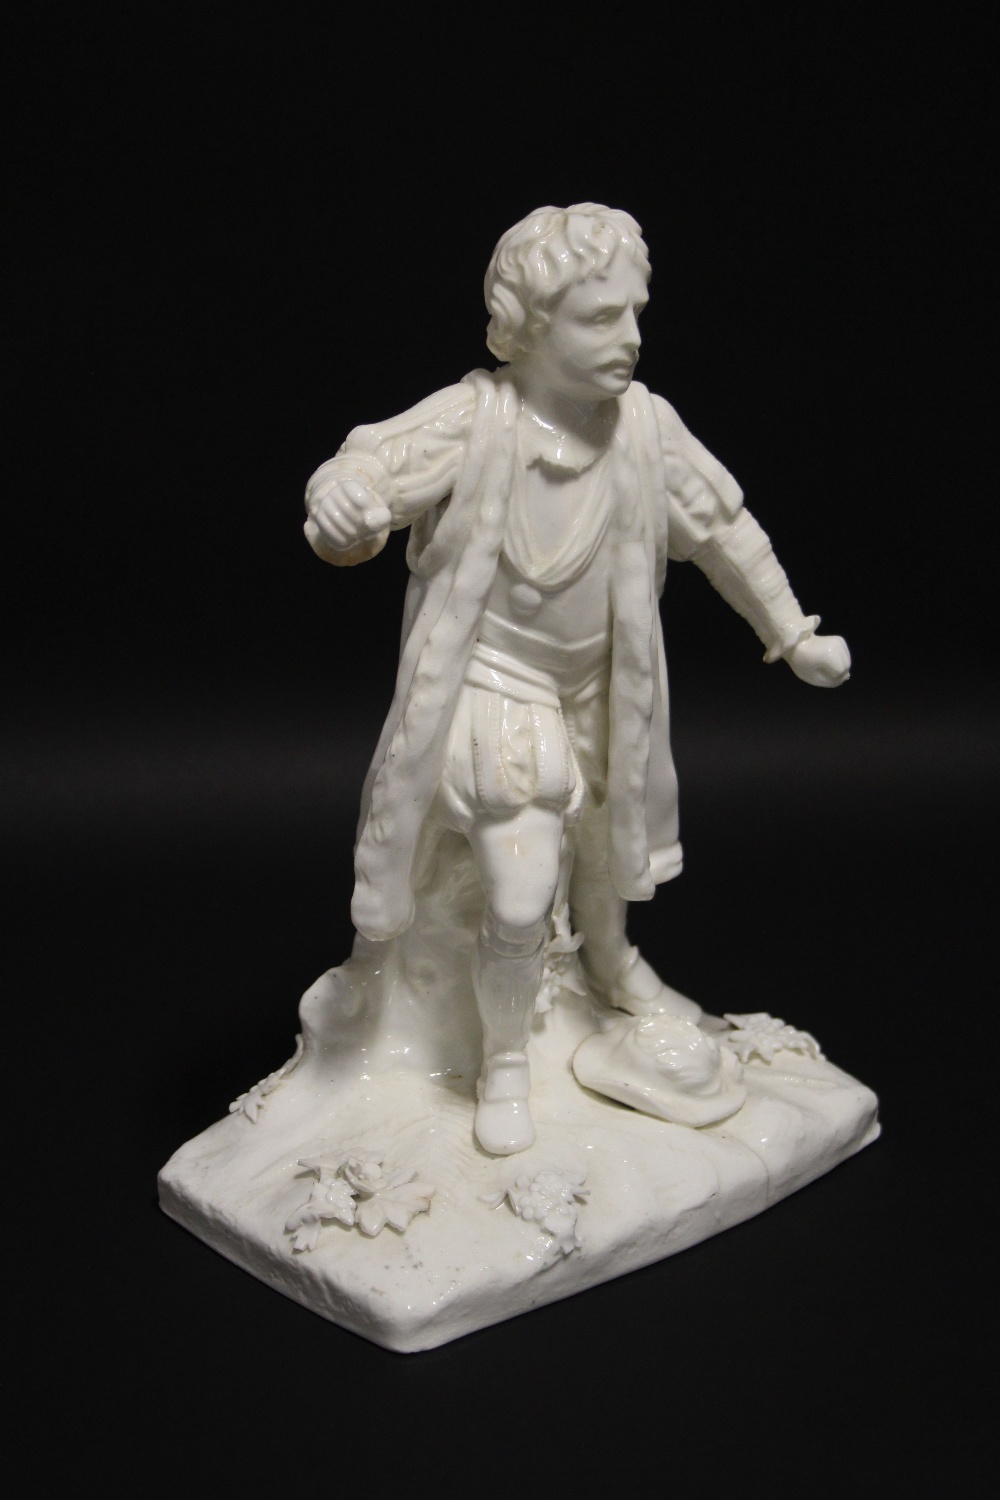 A Victorian white glazed Staffordshire porcelain standing figure of Garrick as Richard III, on - Image 2 of 6